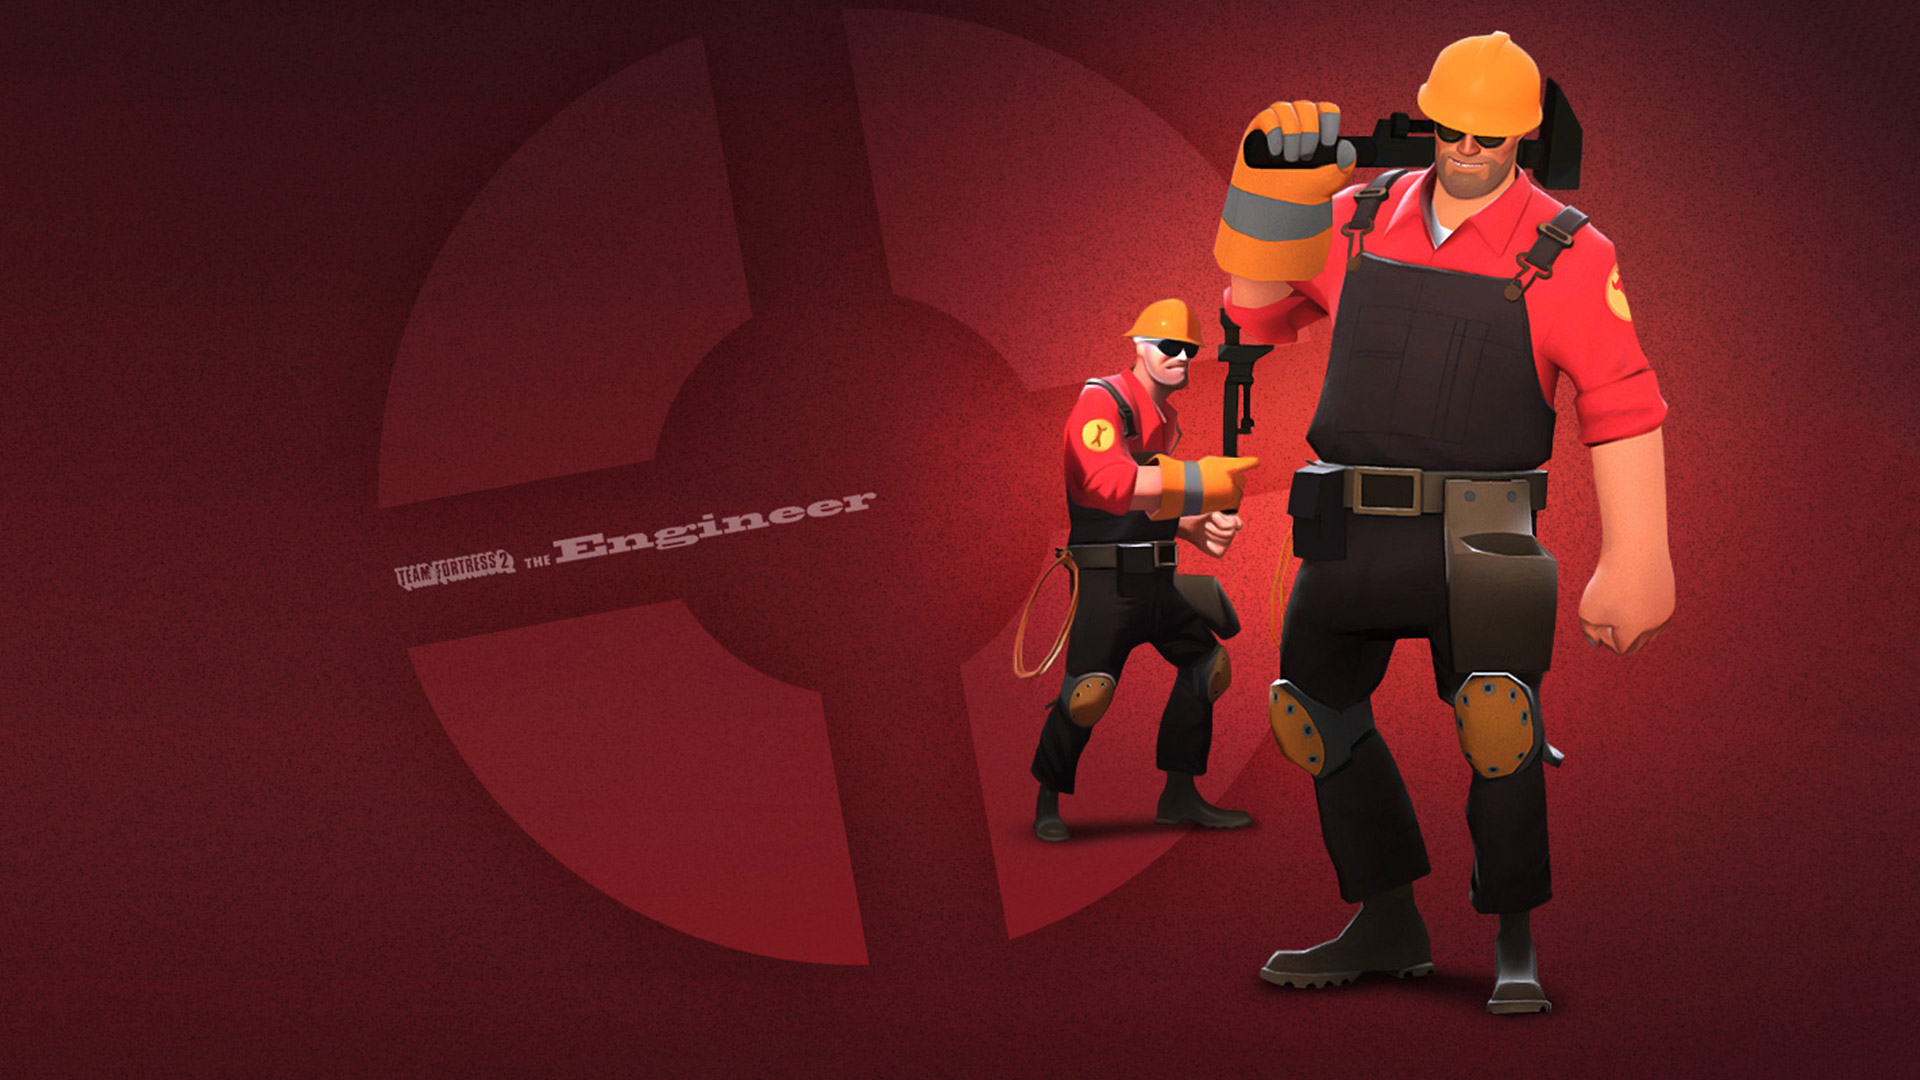 Team Fortress 2 Wallpaper In - Team Fortress 2 Engineer , HD Wallpaper & Backgrounds